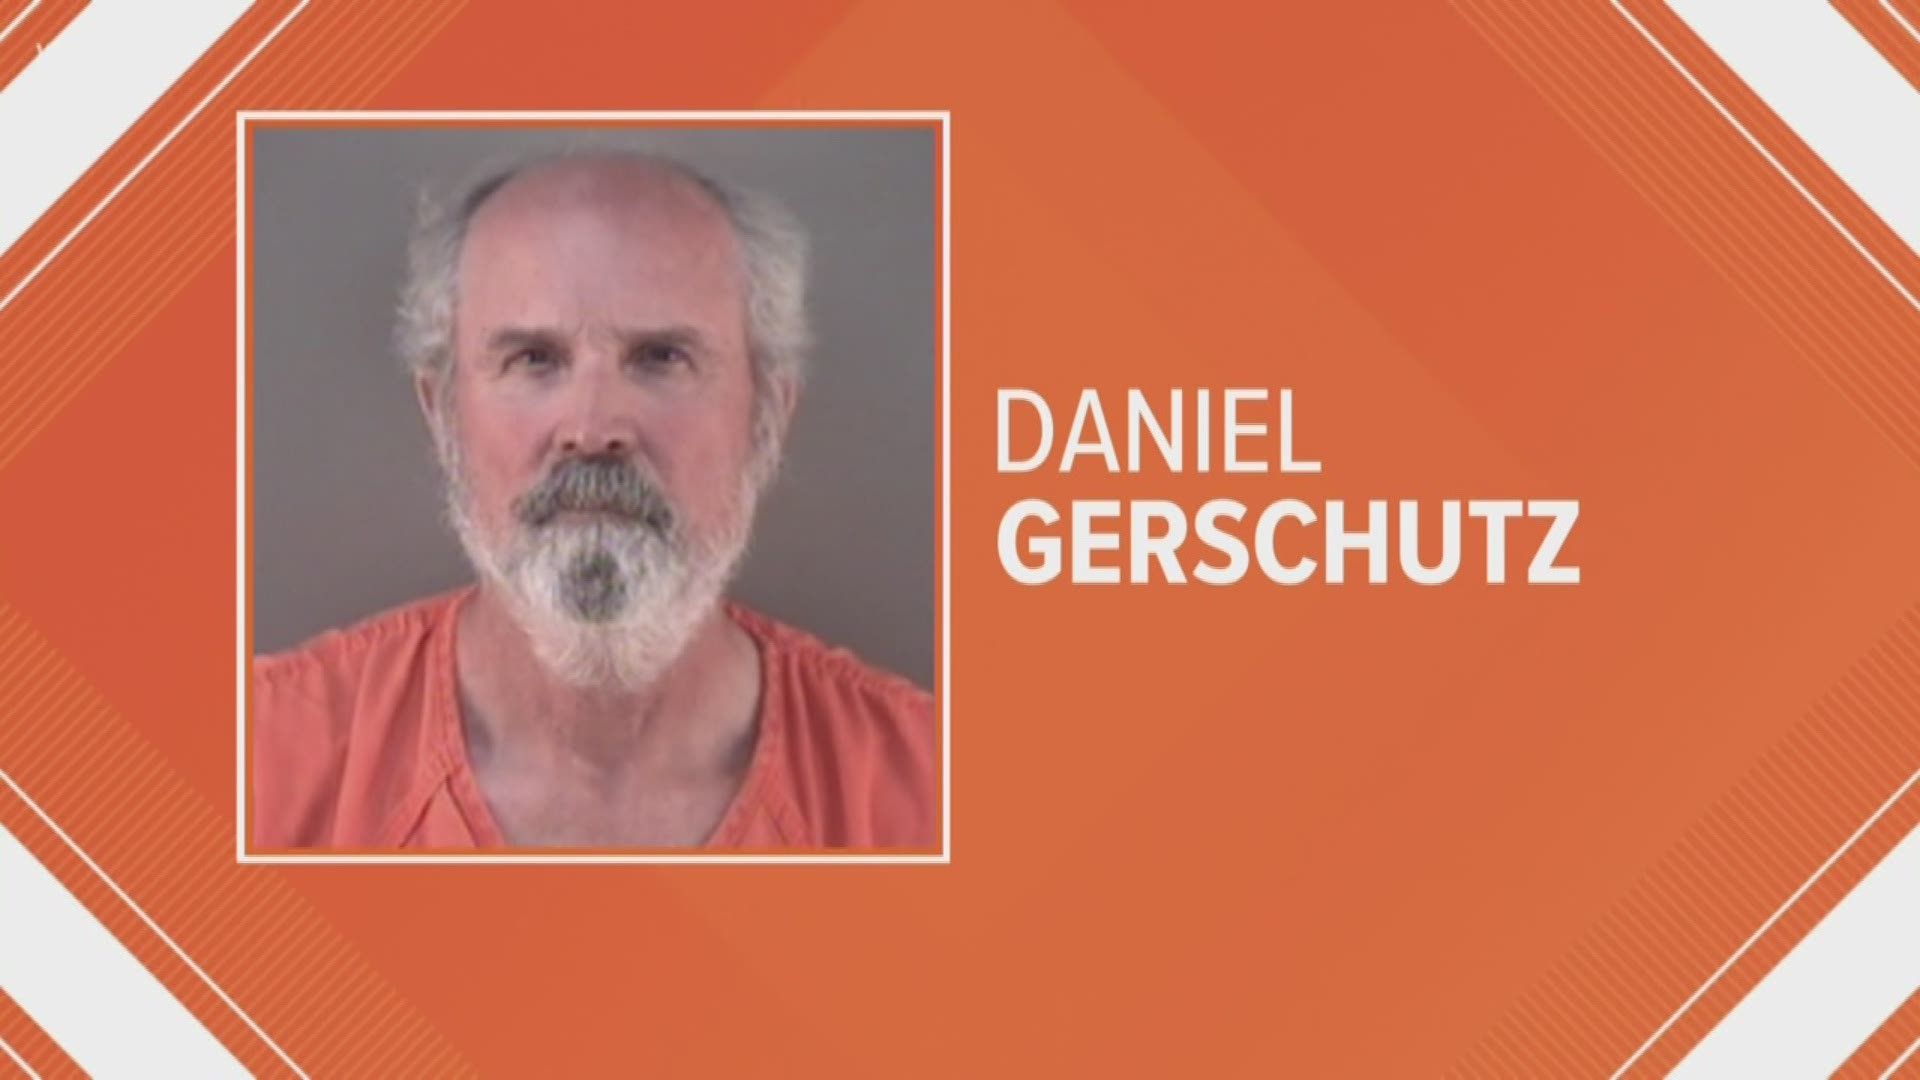 Daniel Gerschutz of Carey is charged with inducing panic after the incident that resulted in the evacuation of the BCI building in Bowling Green.